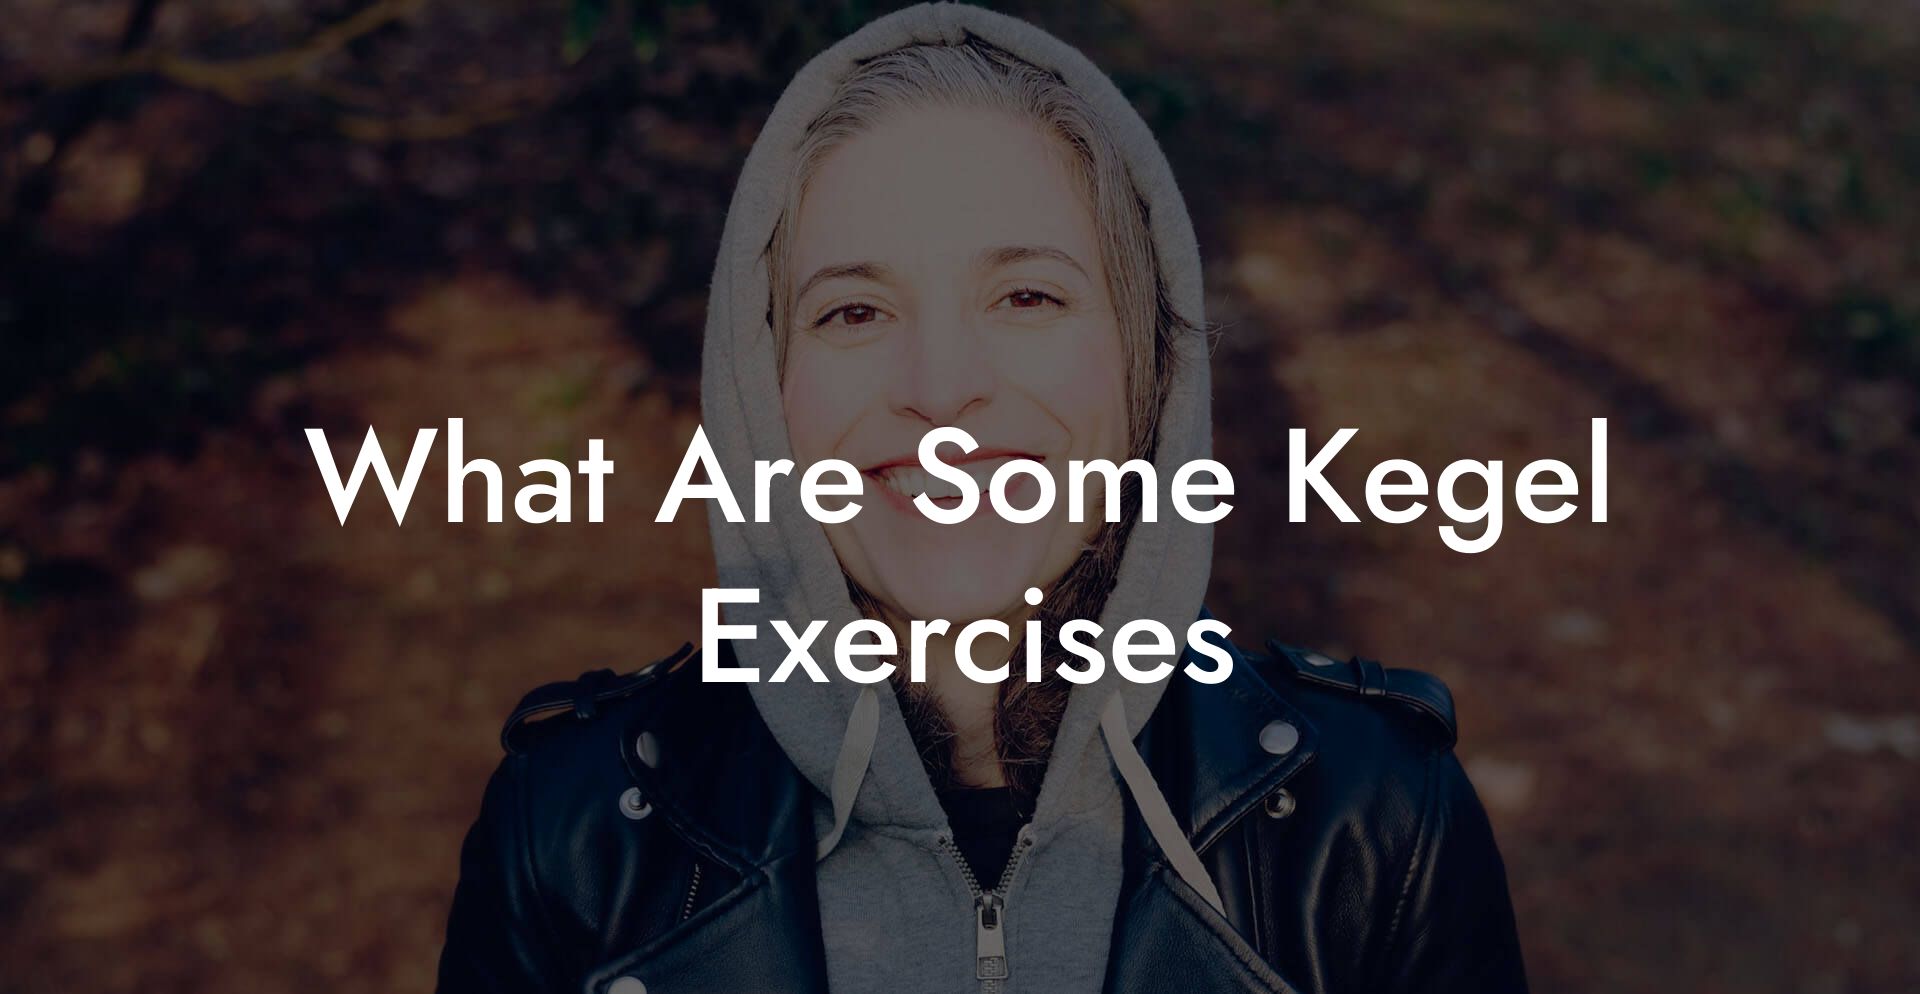 What Are Some Kegel Exercises